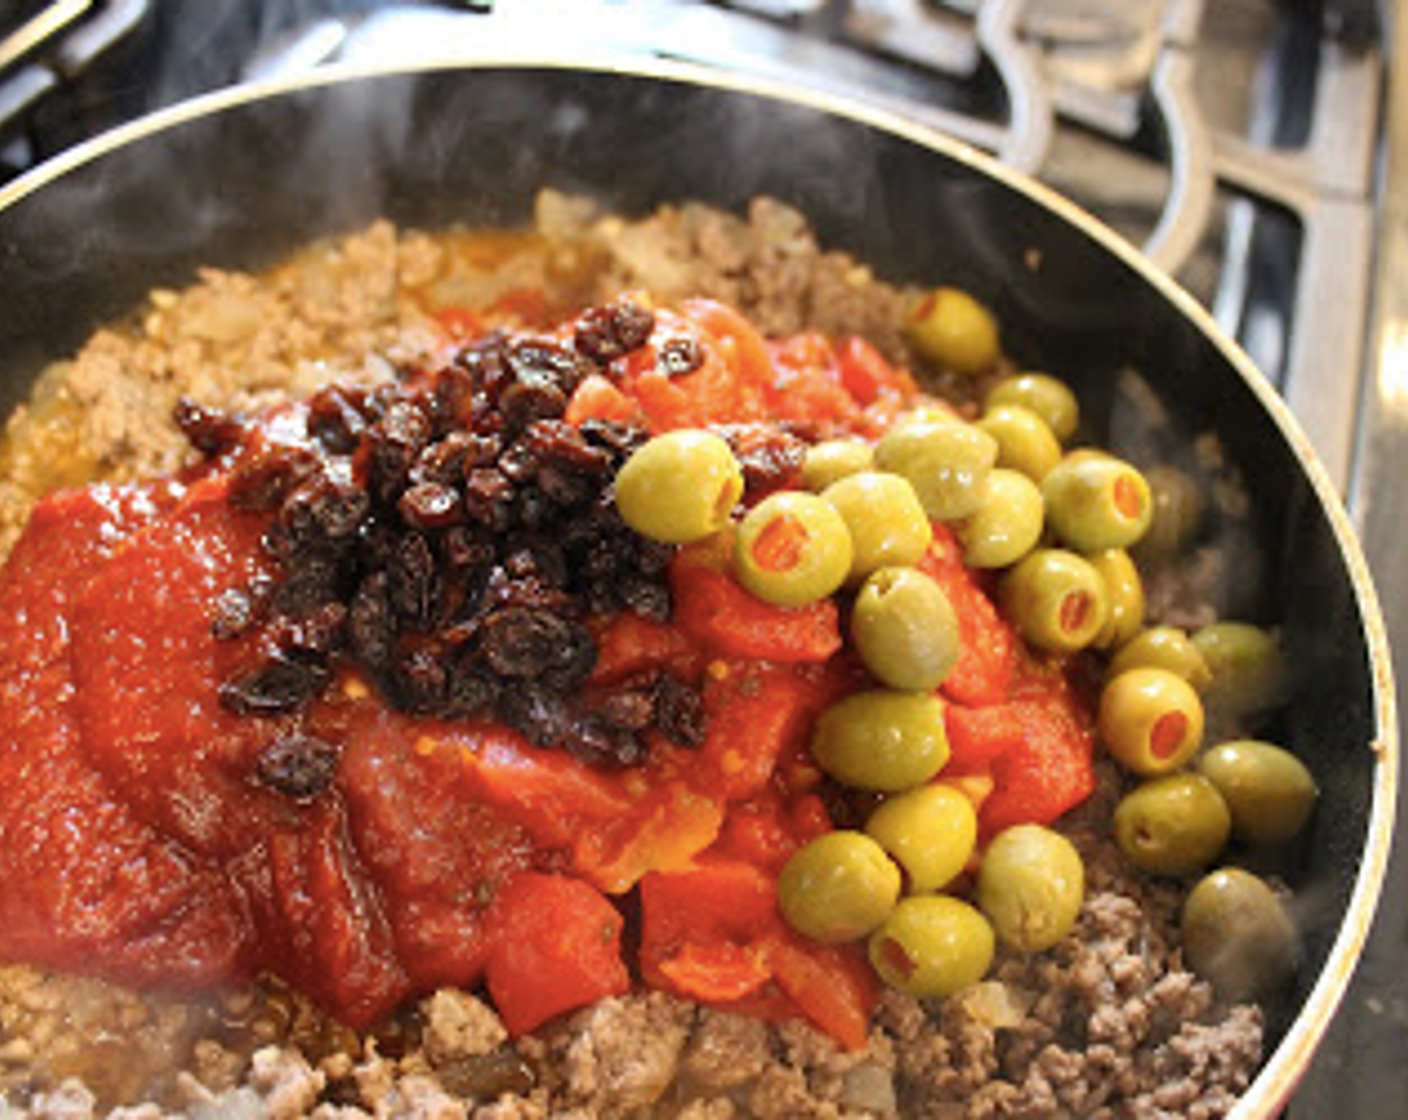 step 3 Add Ro-Tel® Diced Tomatoes & Green Chilies (1 can), Chili Sauce (3/4 cup), Water (1/2 cup), Pimento Stuffed Green Olives (1/2 cup), Raisins (1/4 cup), Salt (to taste), and Ground Black Pepper (to taste).